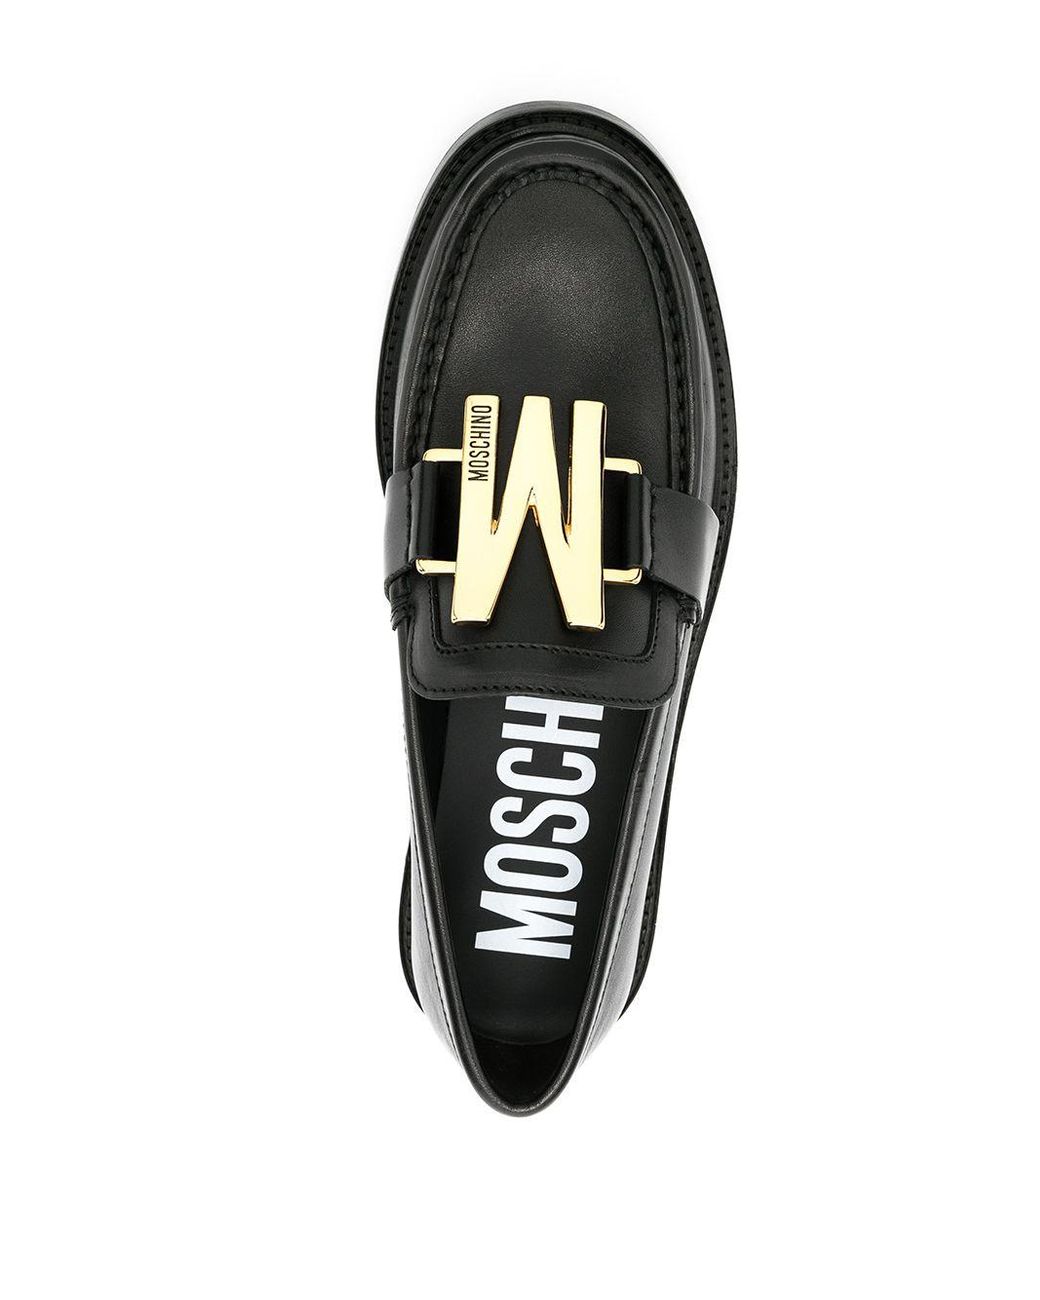 moschino loafers